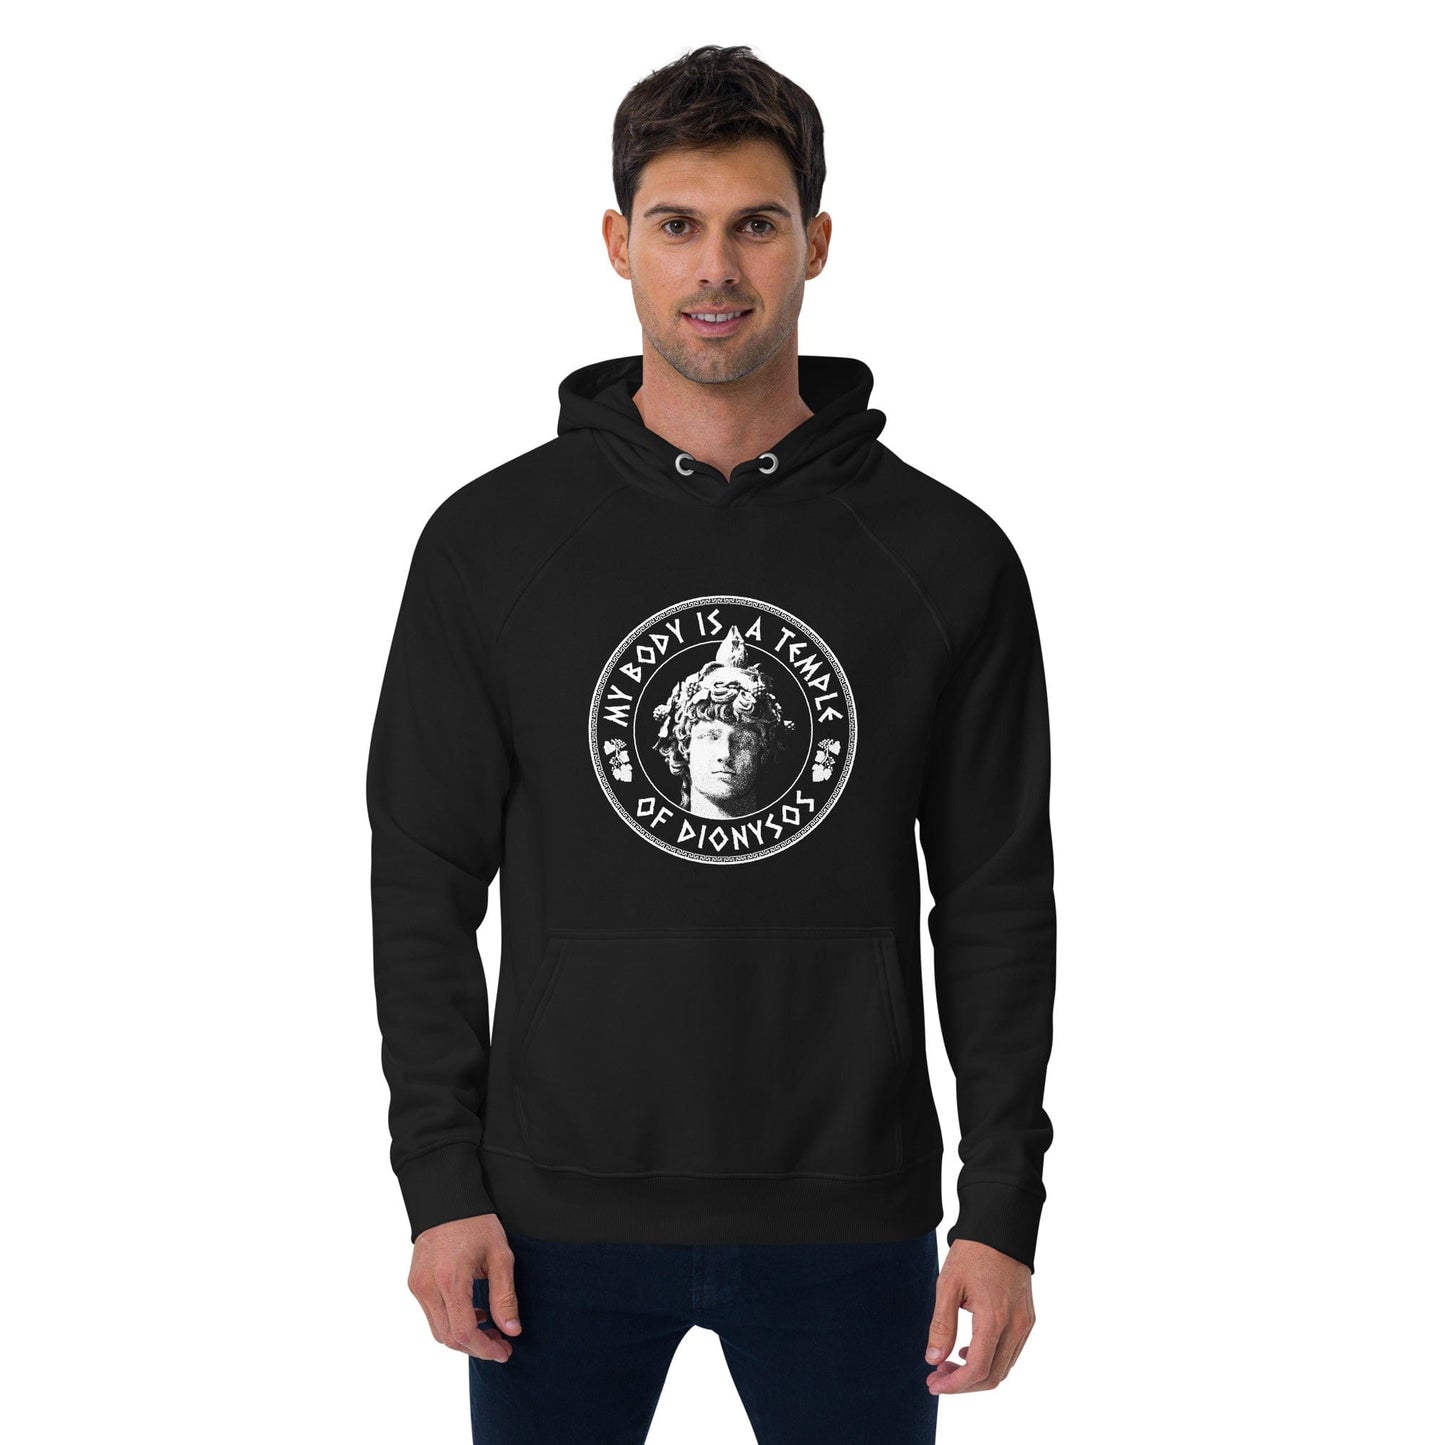 My Body Is A Temple Of Dionysos - Eco Hoodie